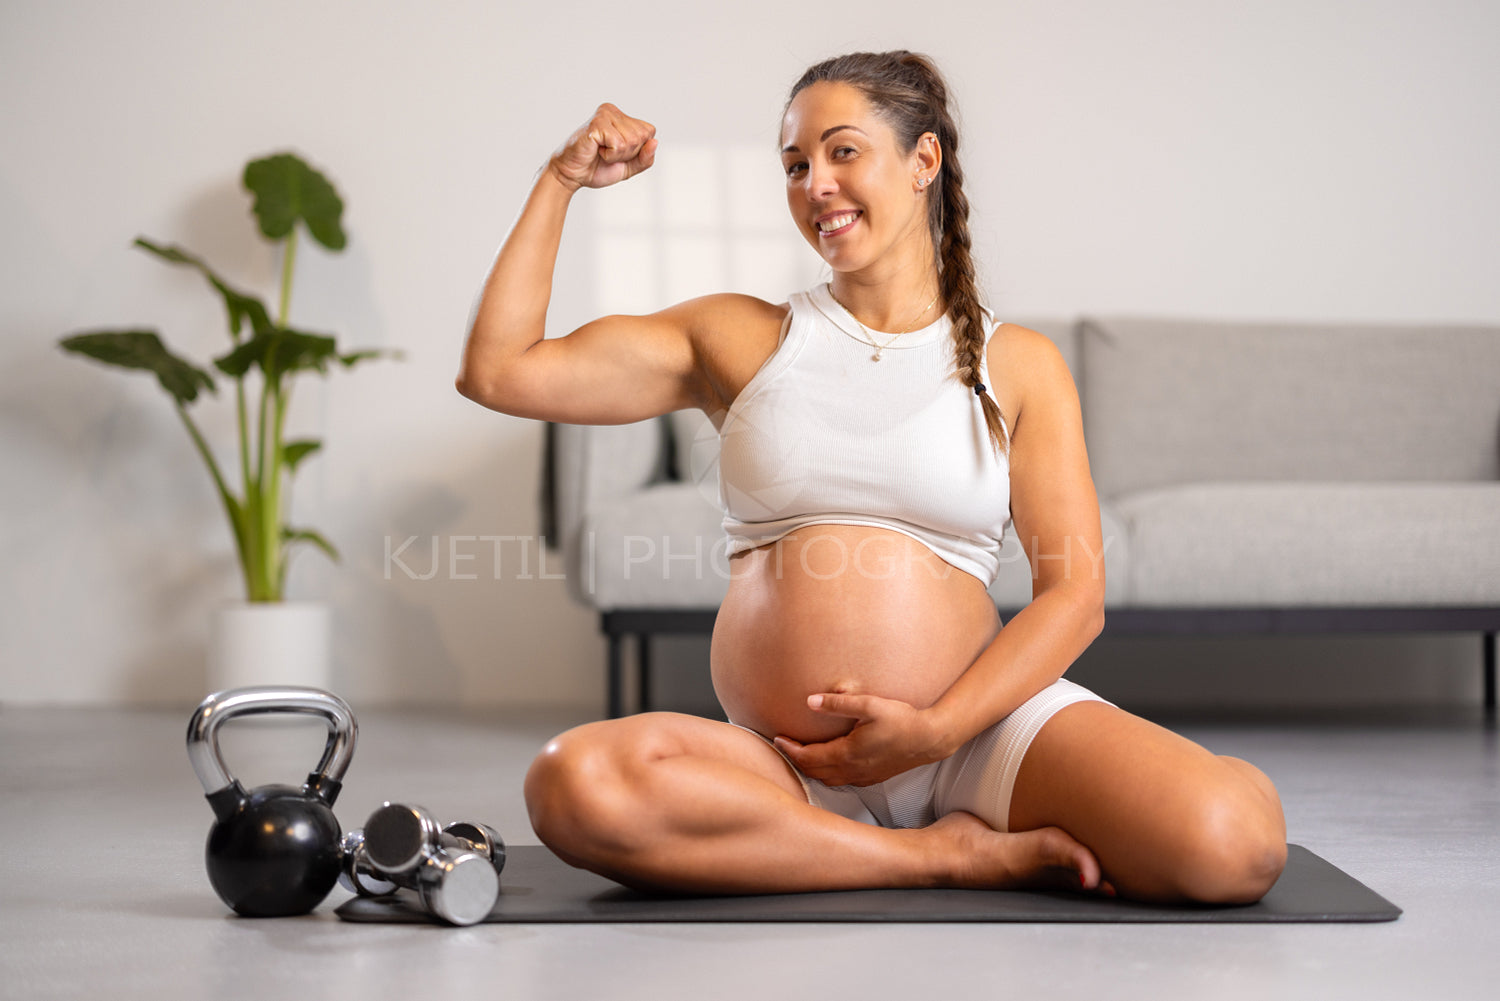 Smiling Strong Pregnant Expecting Mother Showing Off Muscles After Fitness Routine in Living Room